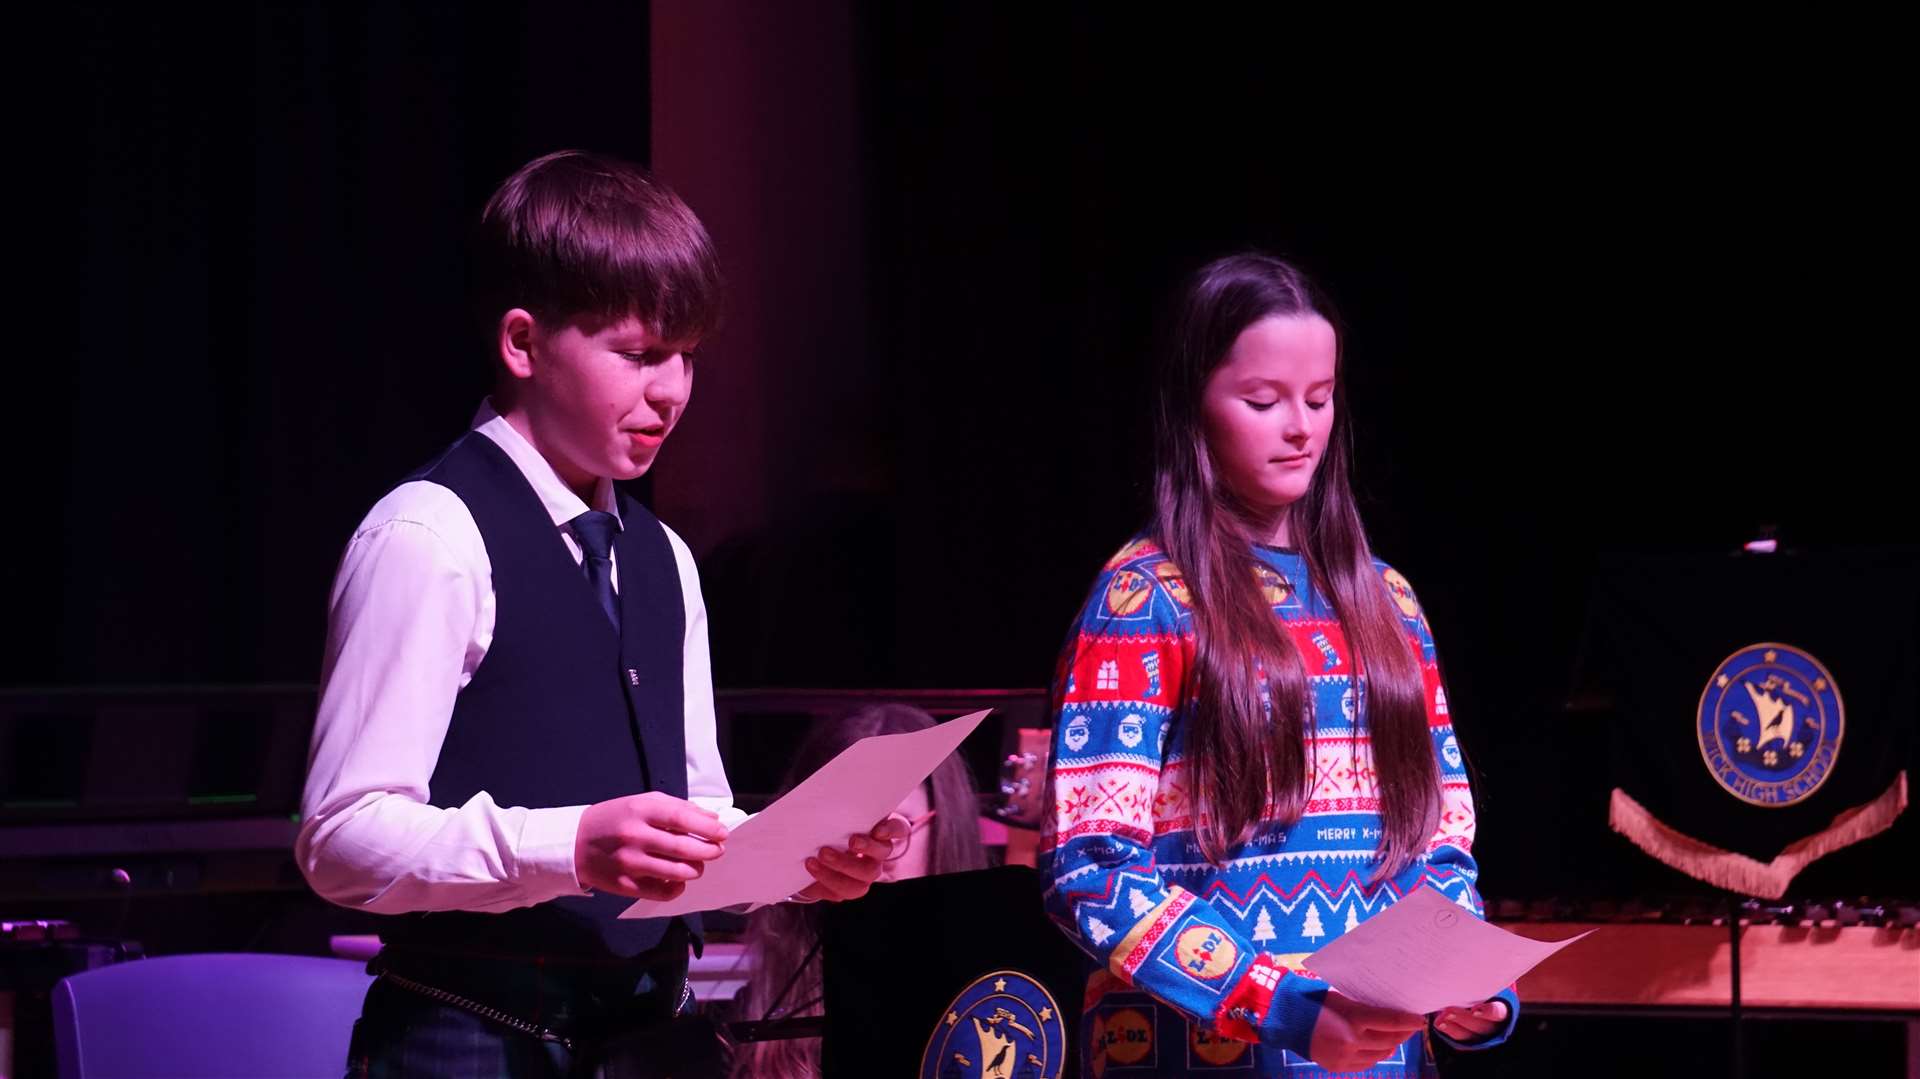 Lucy Thain, S2 and Andrew Sinclair, S3 hosted the evening and had some good Christmas cracker style jokes as well. Picture: DGS